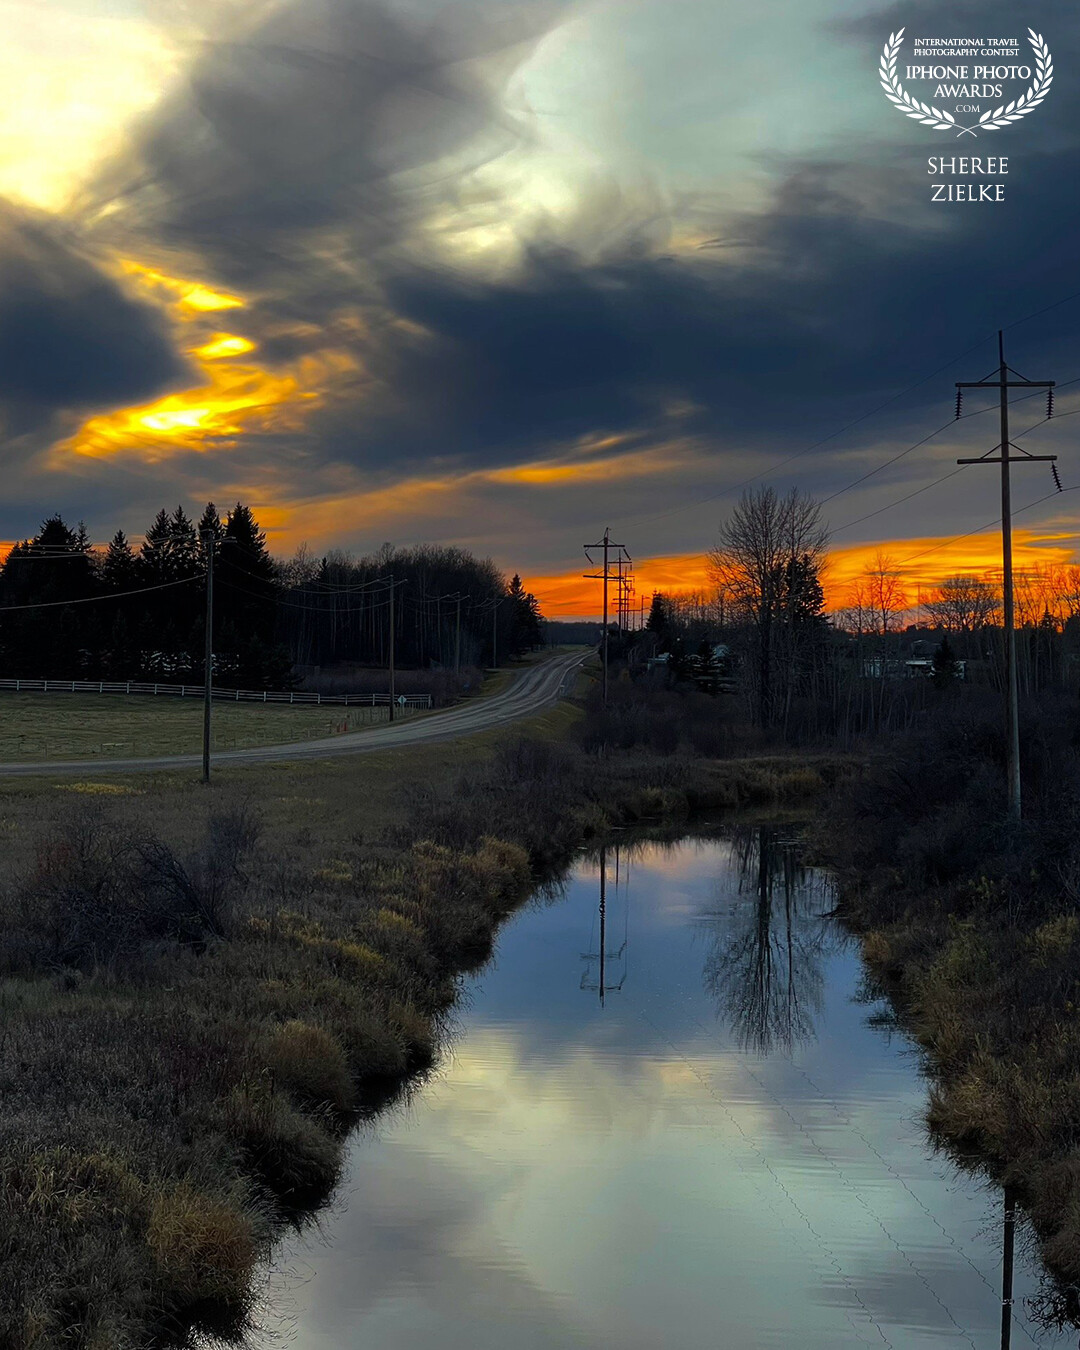 Near Sylvan Lake in our province of Alberta affords many photo opportunities, especially at sunset. But I had to chase this one to find a dramatic foreground subject. We found this ditch with its watery tree reflections down a gravel road. Perfect.